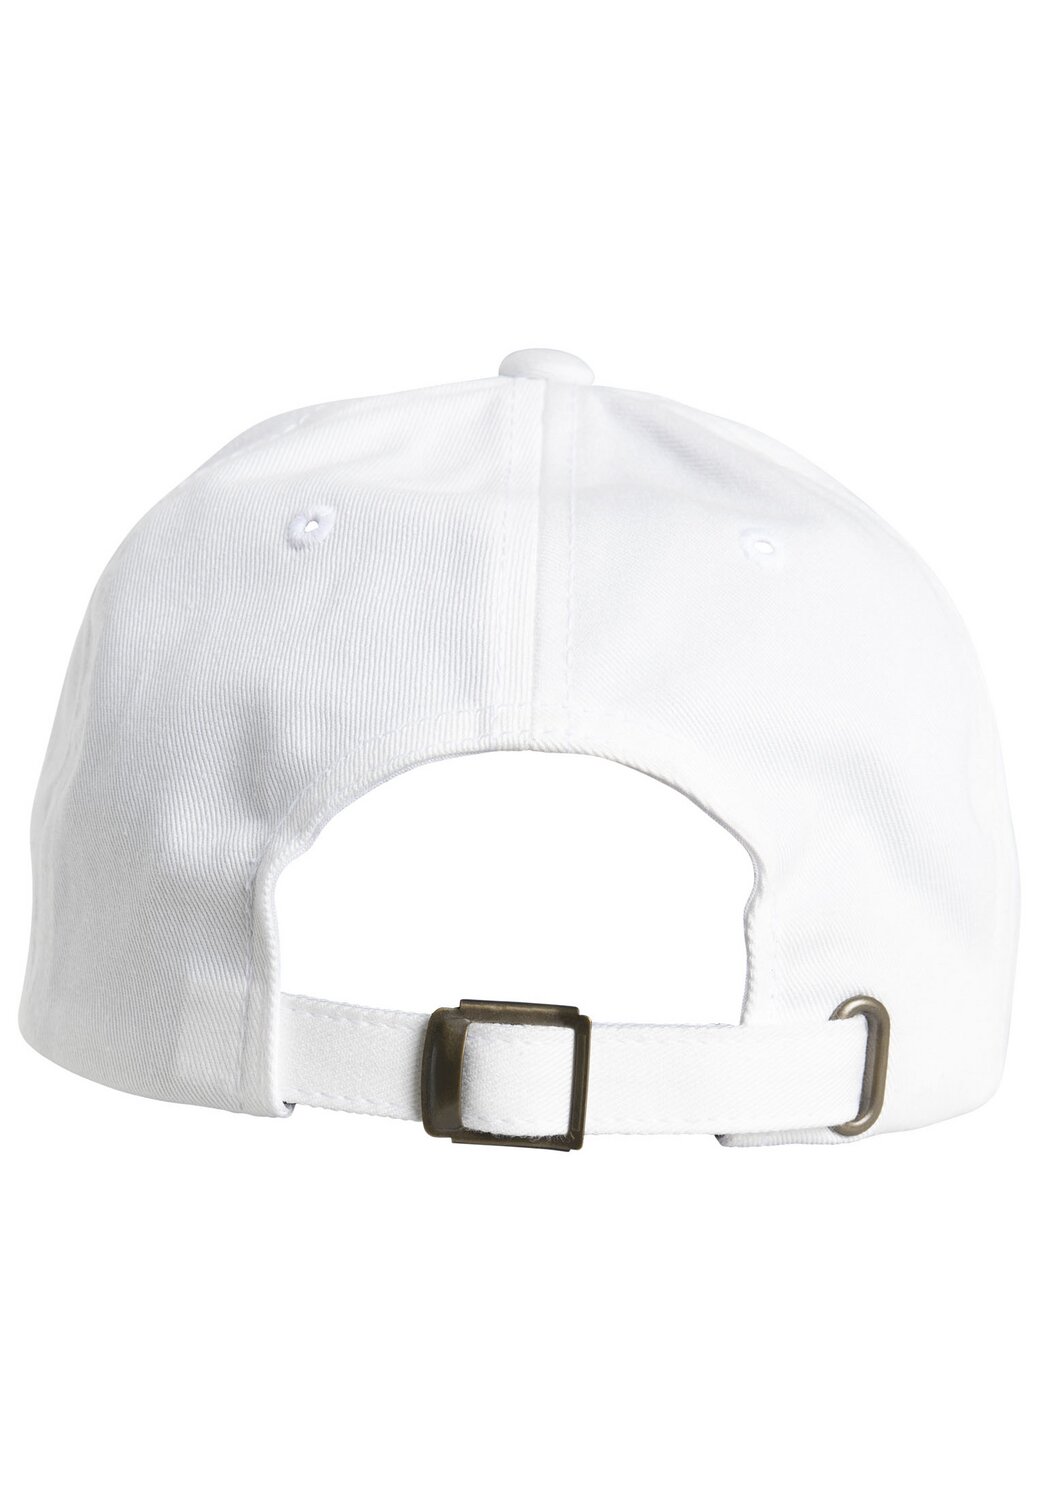 MAXISCOOT Dad | red/green Stripe Flexfit Hat white/fire